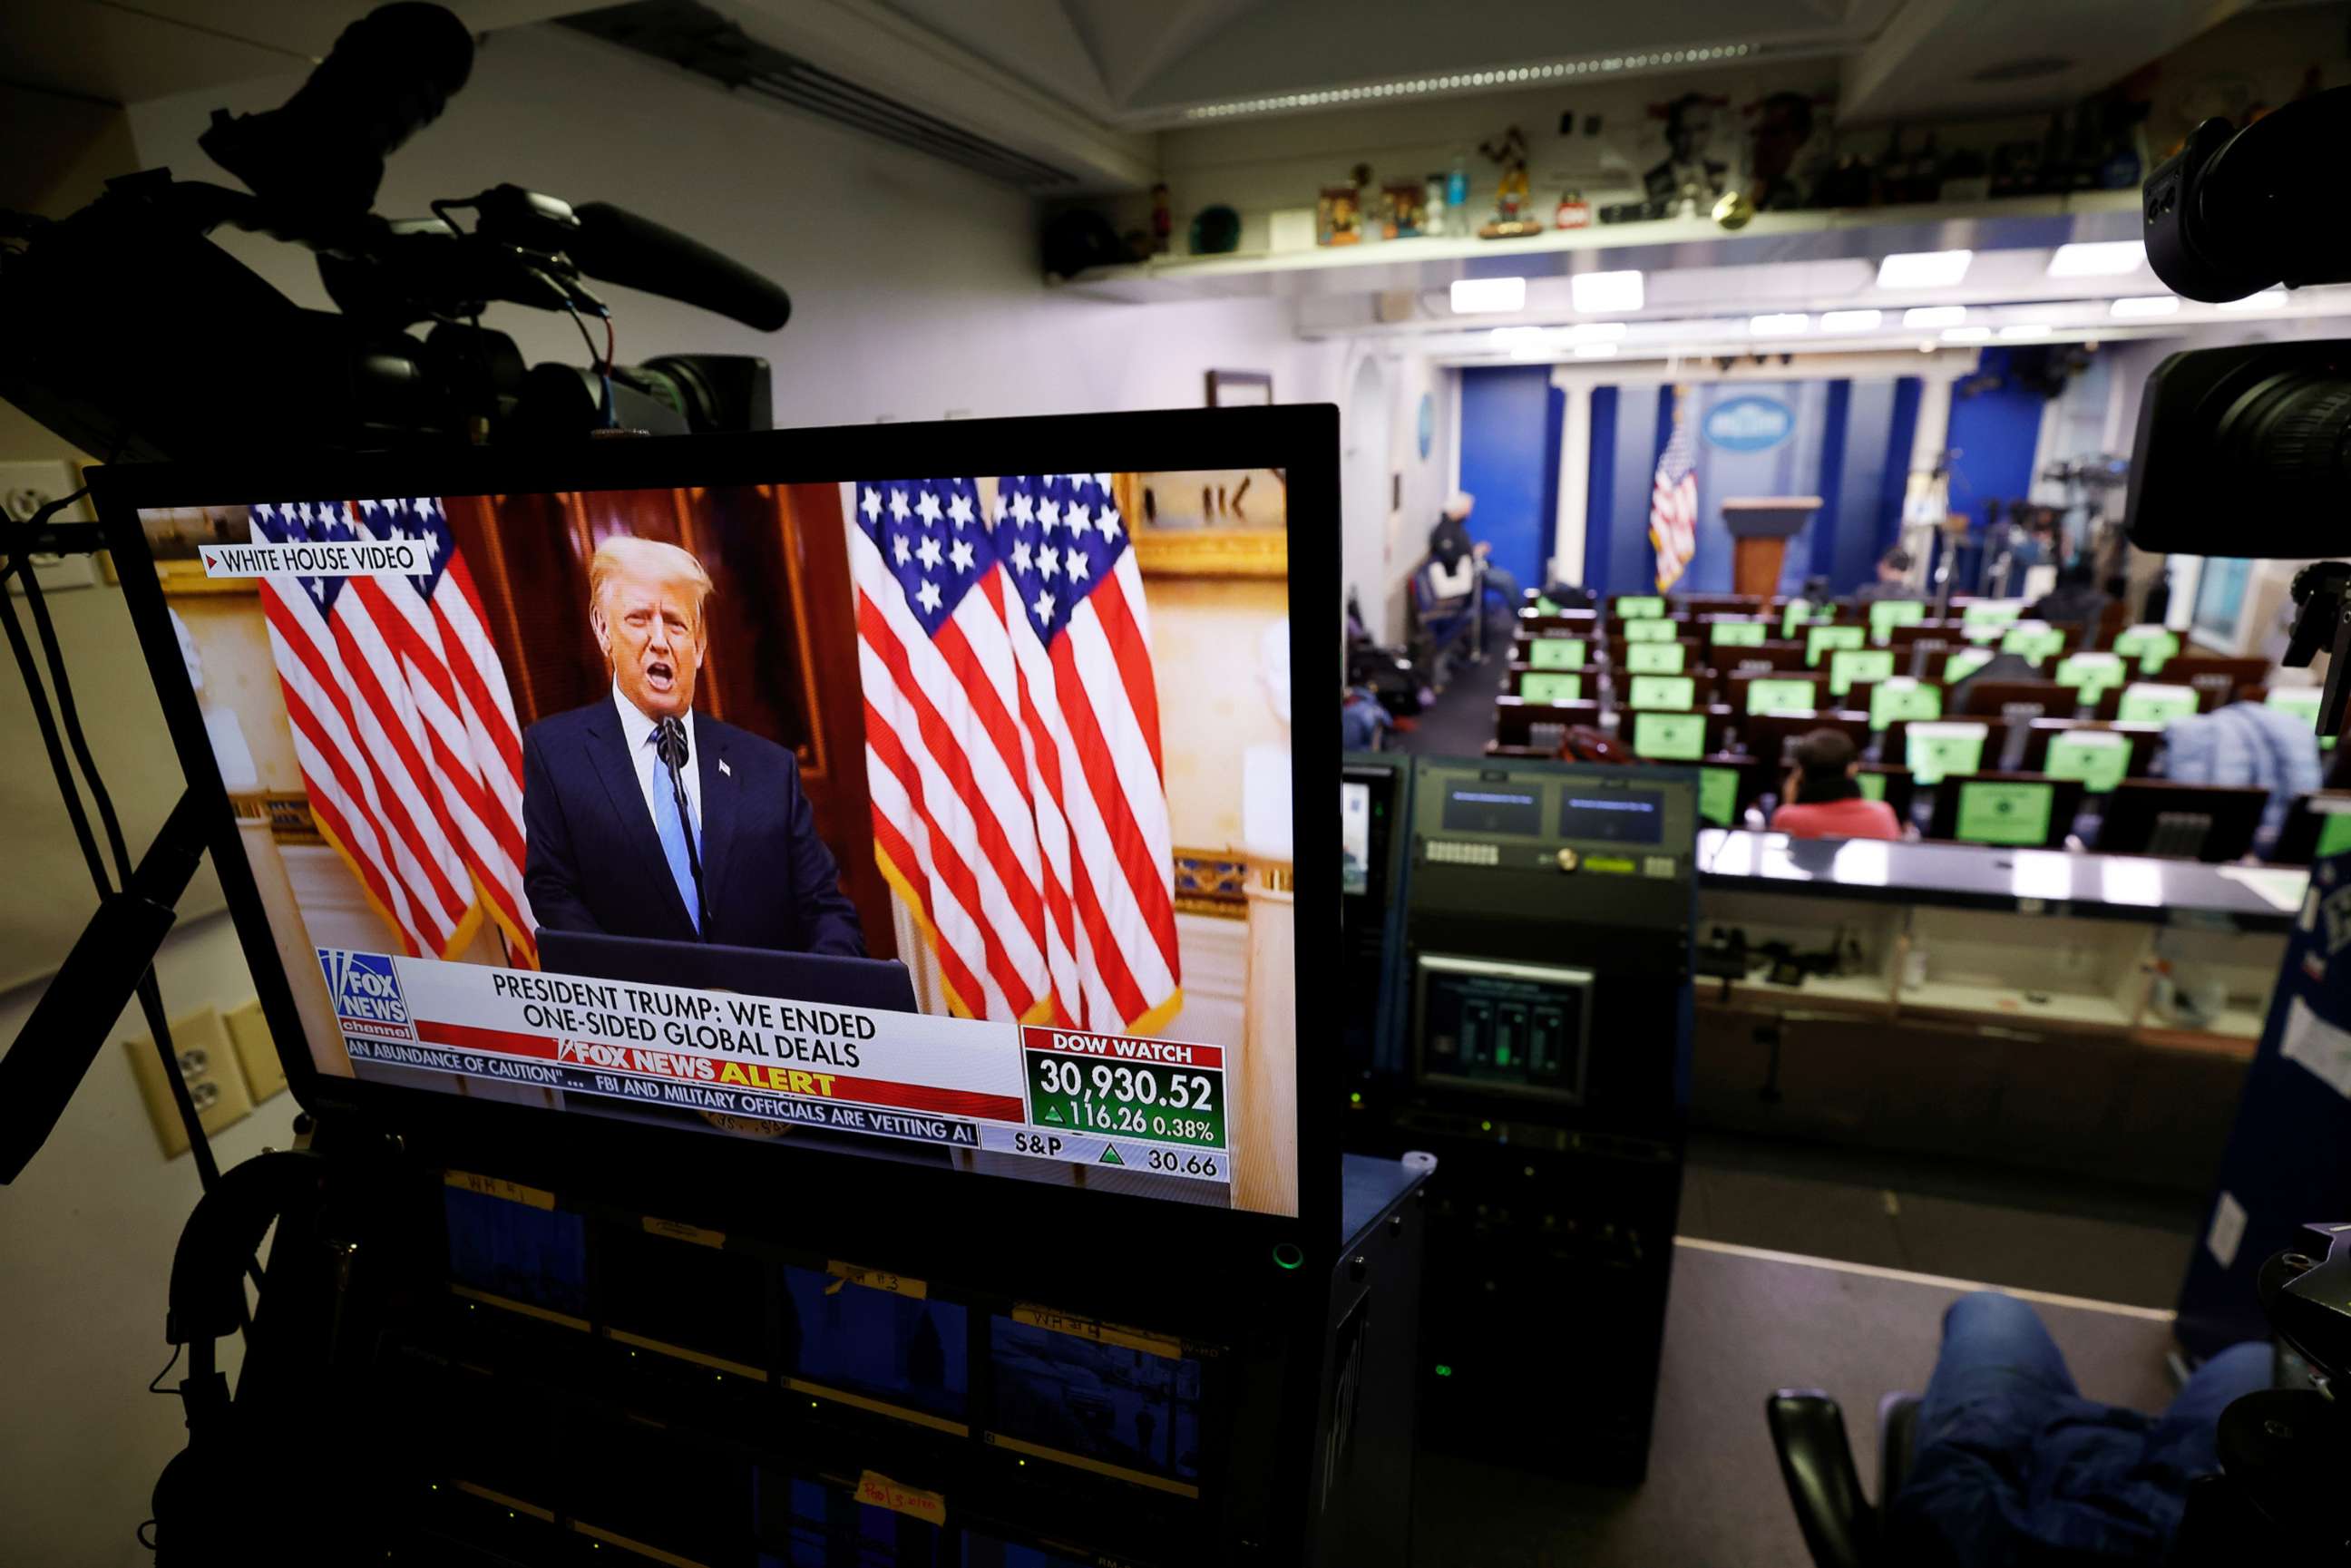 PHOTO: President Donald Trump makes remarks on a television monitor from the White House Briefing Room during his last day in office, Jan. 19, 2021.